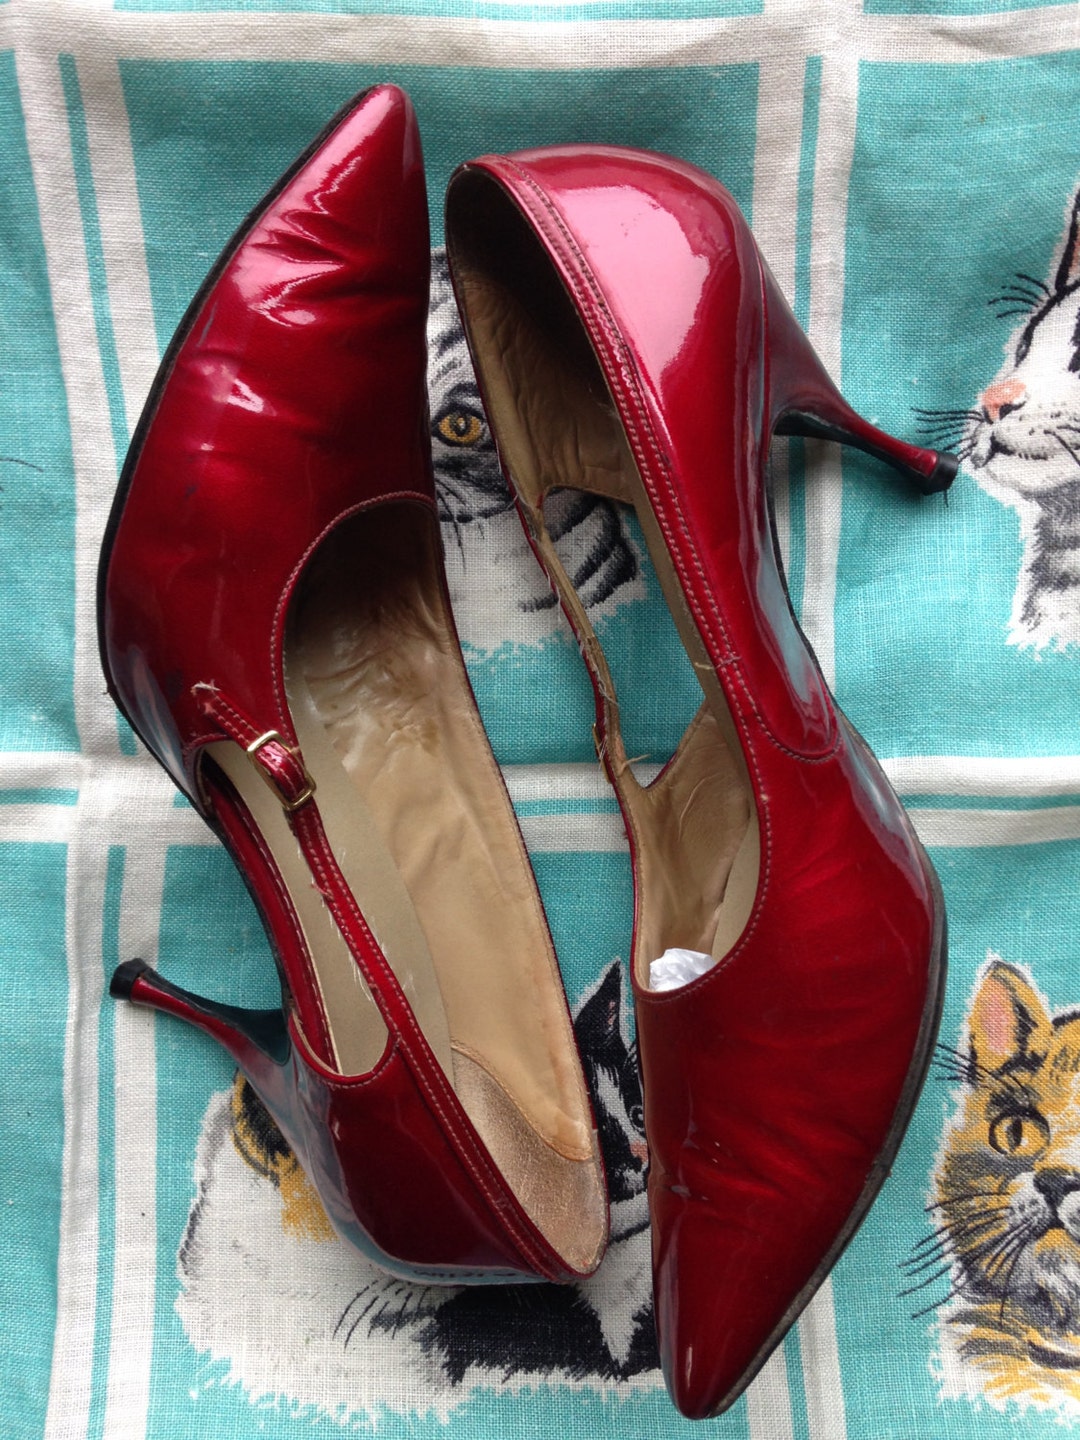 60's Candy Apple Red Patent Leather Pumps Stiletto US 7, EU 37 1/2 UK 4 ...